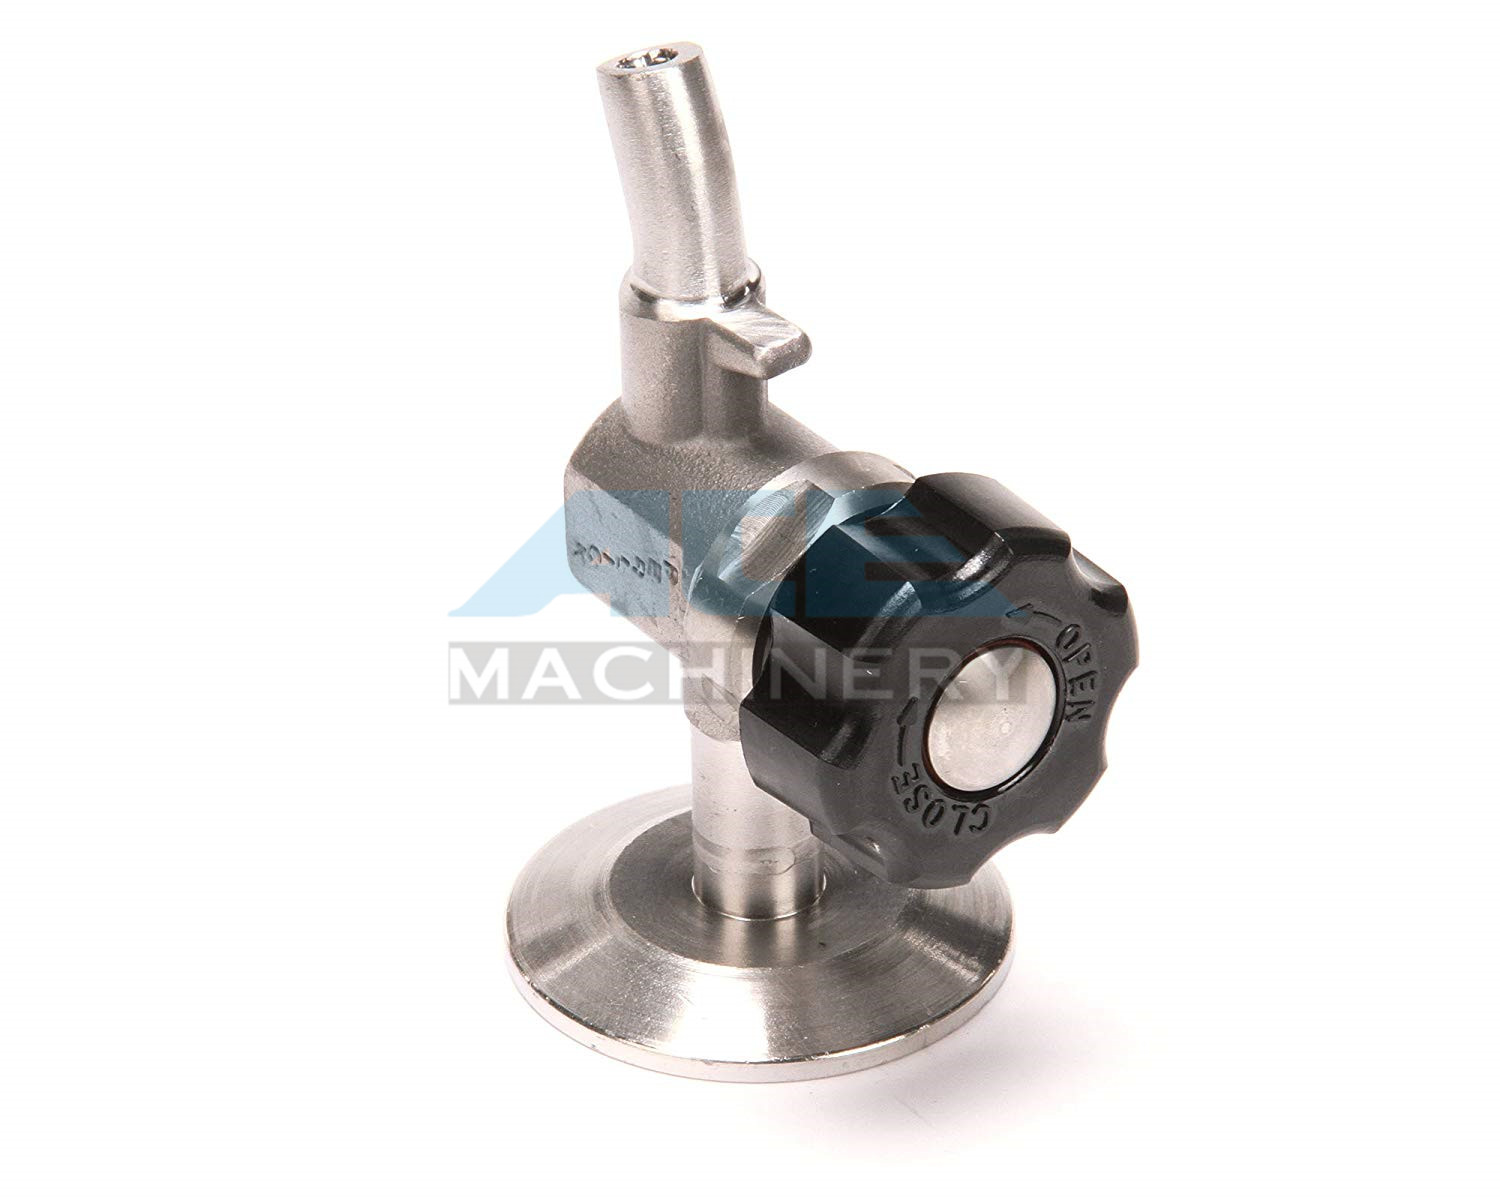 Buy cheap Stainless Steel Material Aspetic Sample Valve SS316L Sanitary Sampling Cock from wholesalers